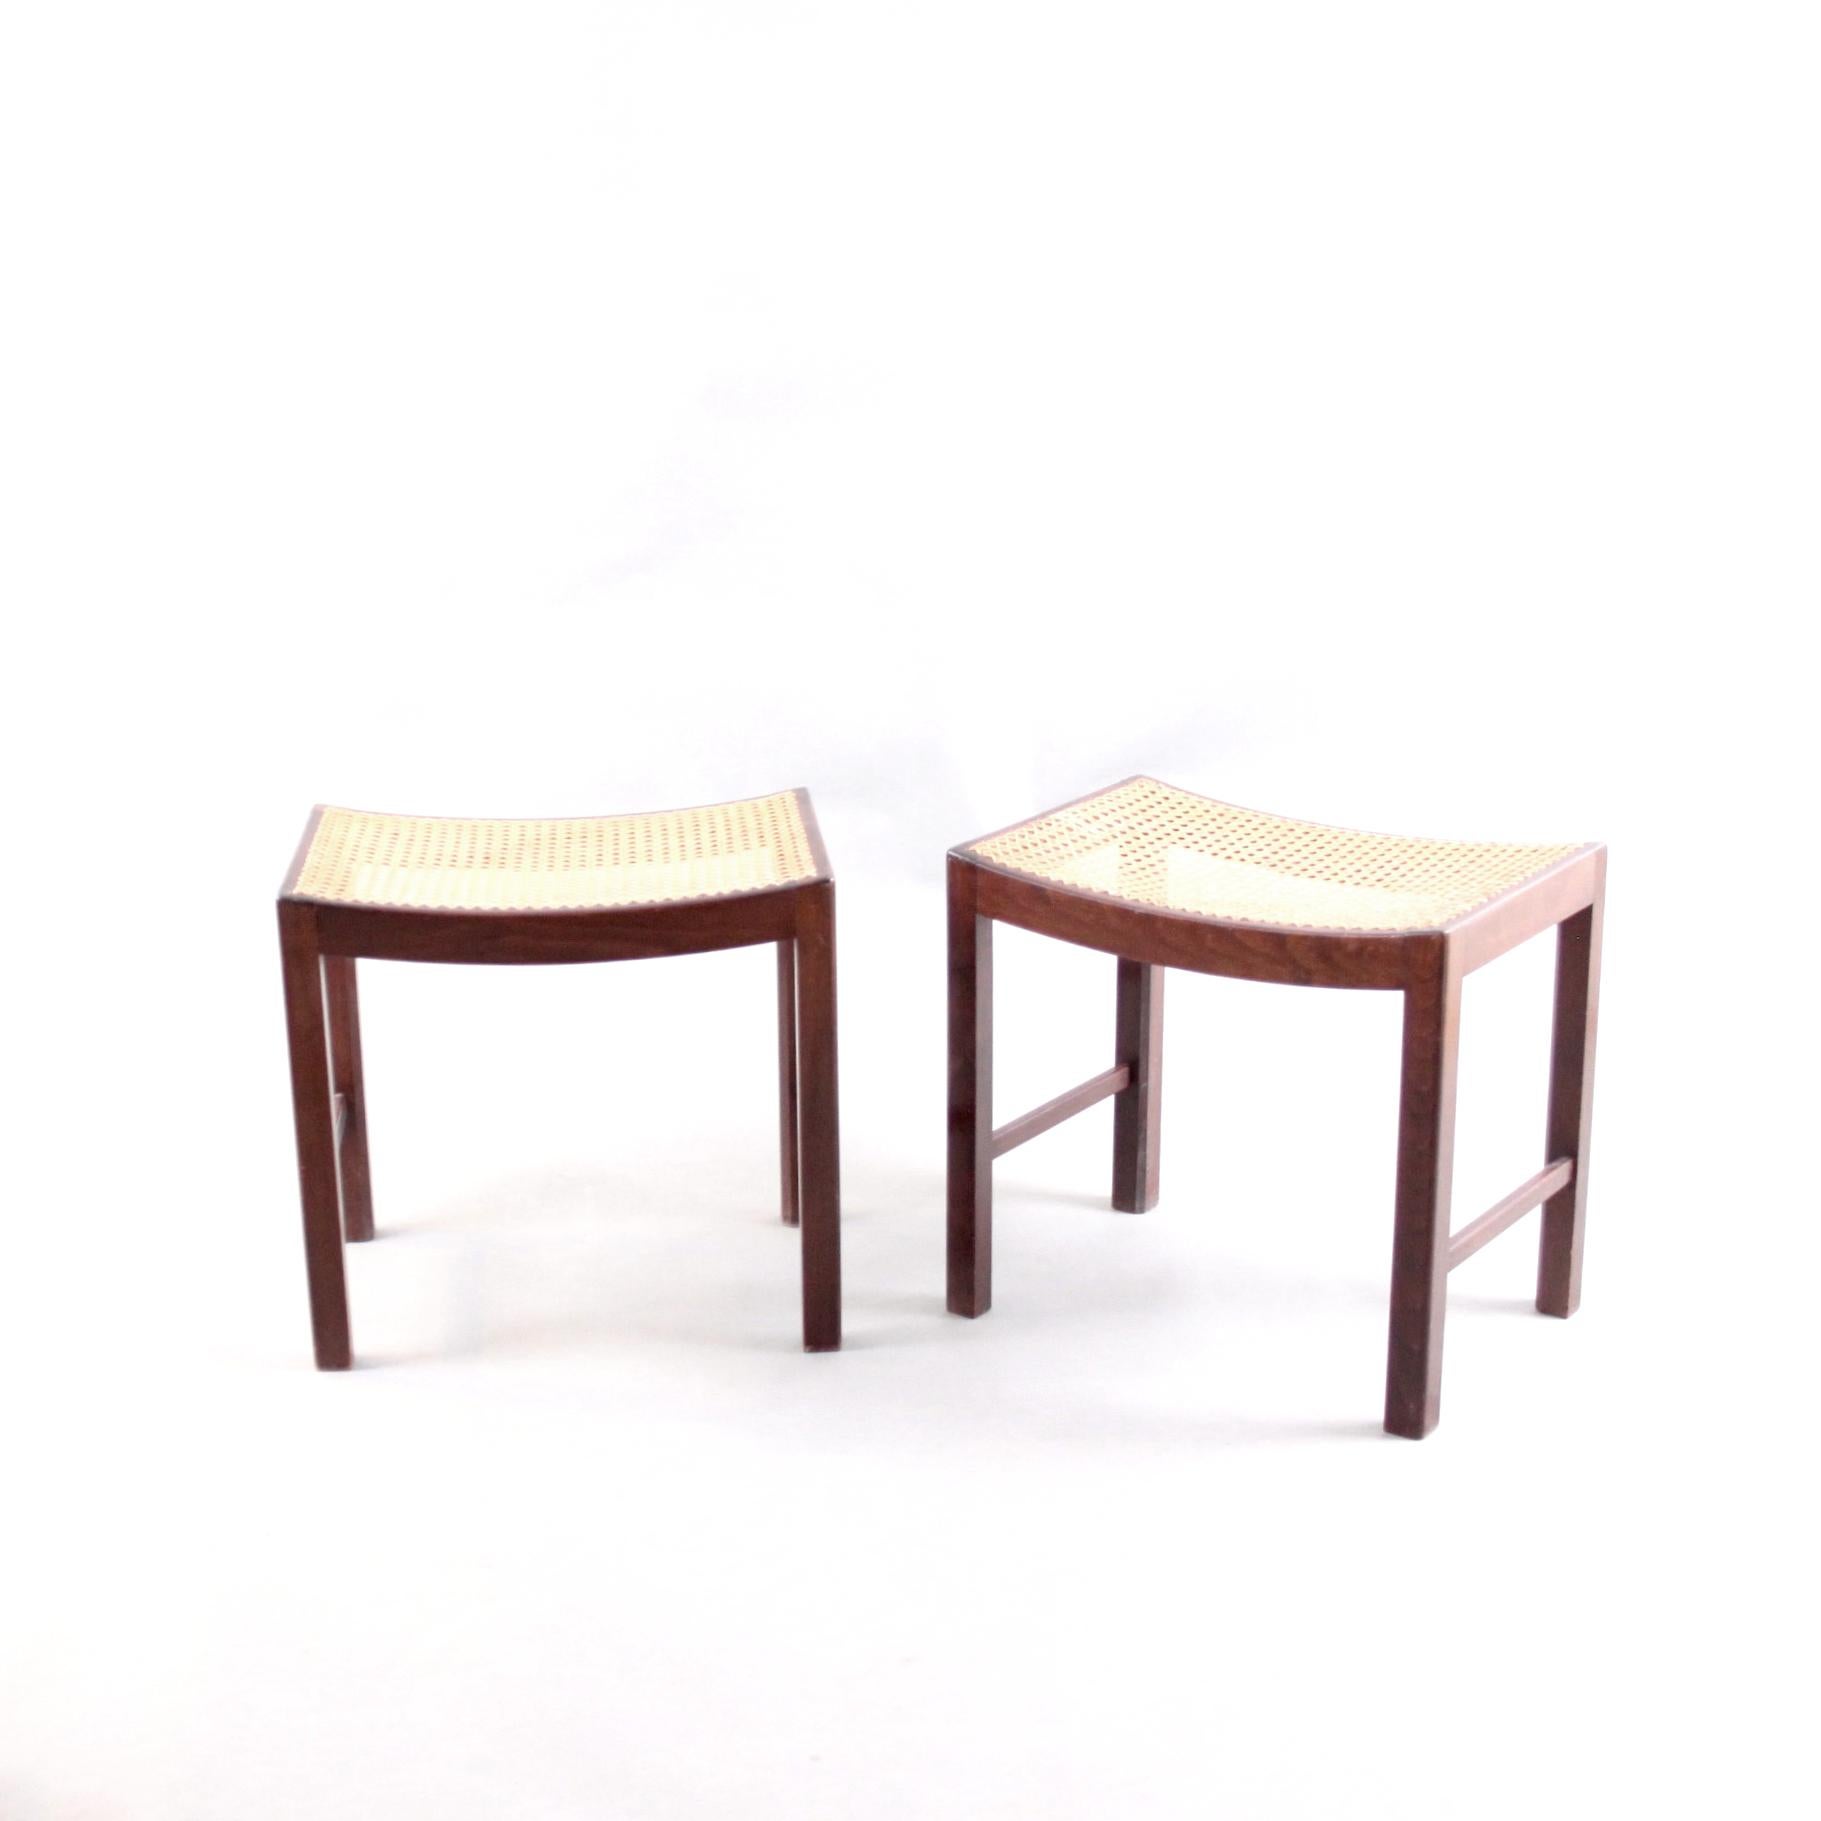 Scandinavian Modern Pair of Fritz Hansen Stools with Curved Cane Seats, 1950s